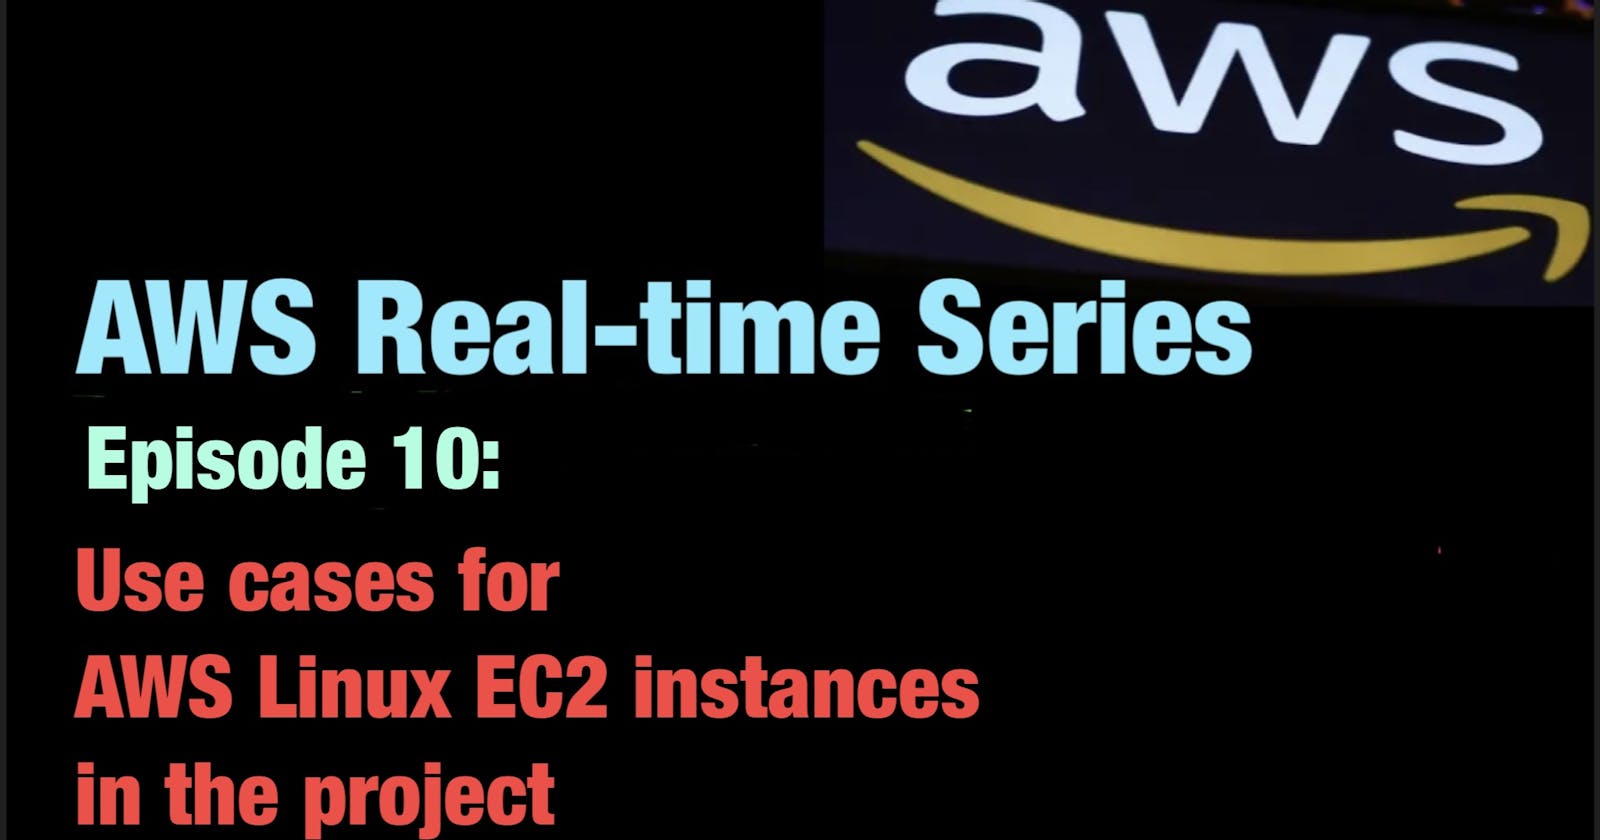 Why AWS Linux EC2 instances are used in the project?